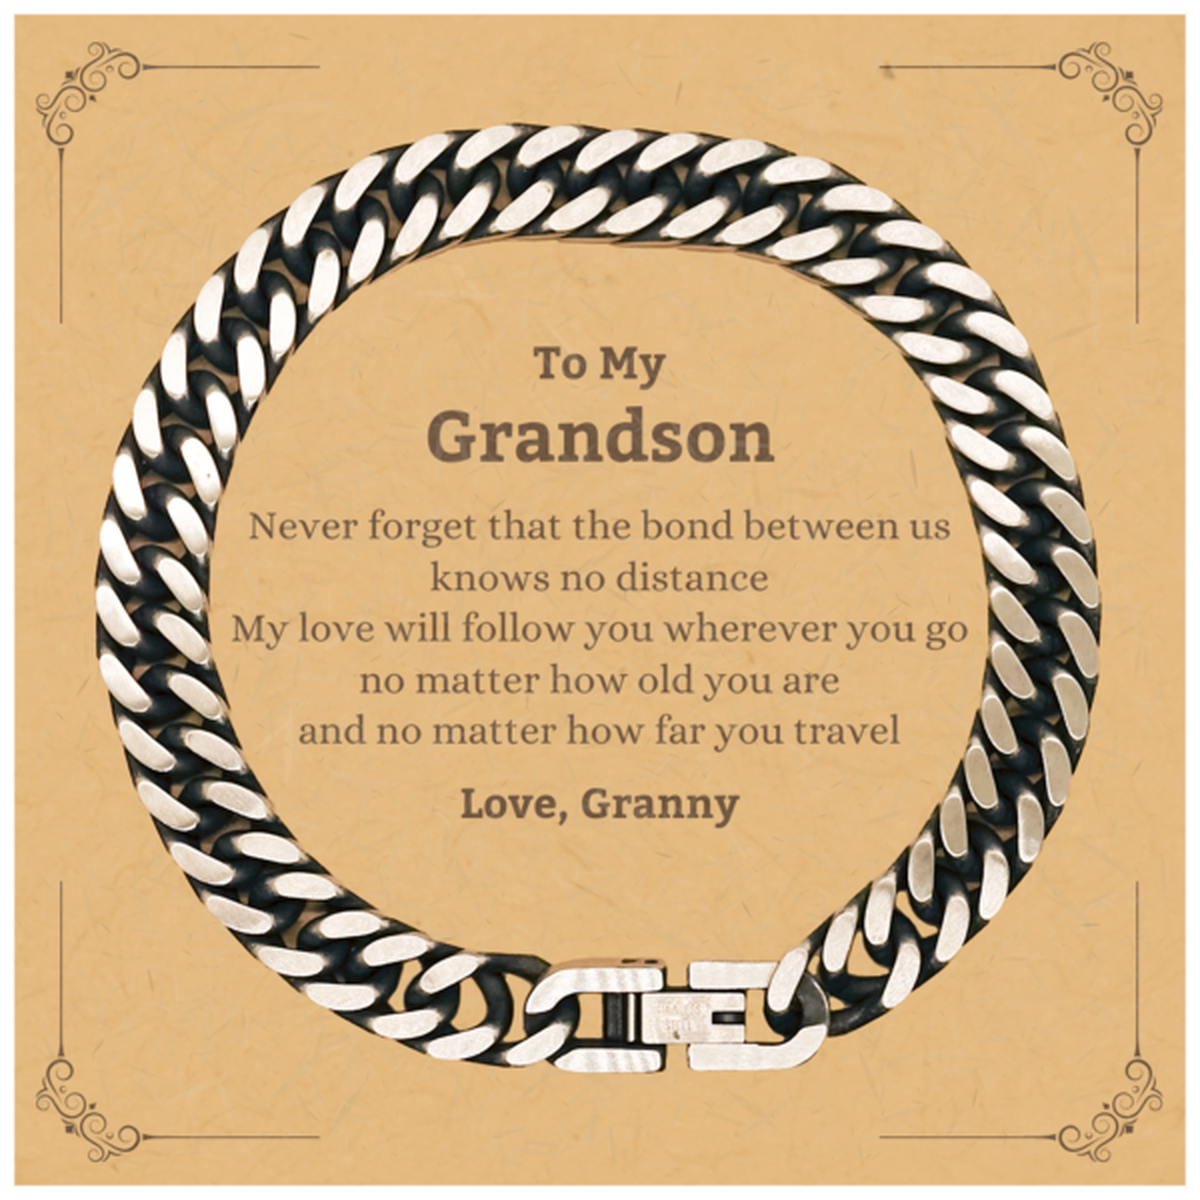 Grandson Birthday Gifts from Granny, Adjustable Cuban Link Chain Bracelet for Grandson Christmas Graduation Unique Gifts Grandson Never forget that the bond between us knows no distance. Love, Granny